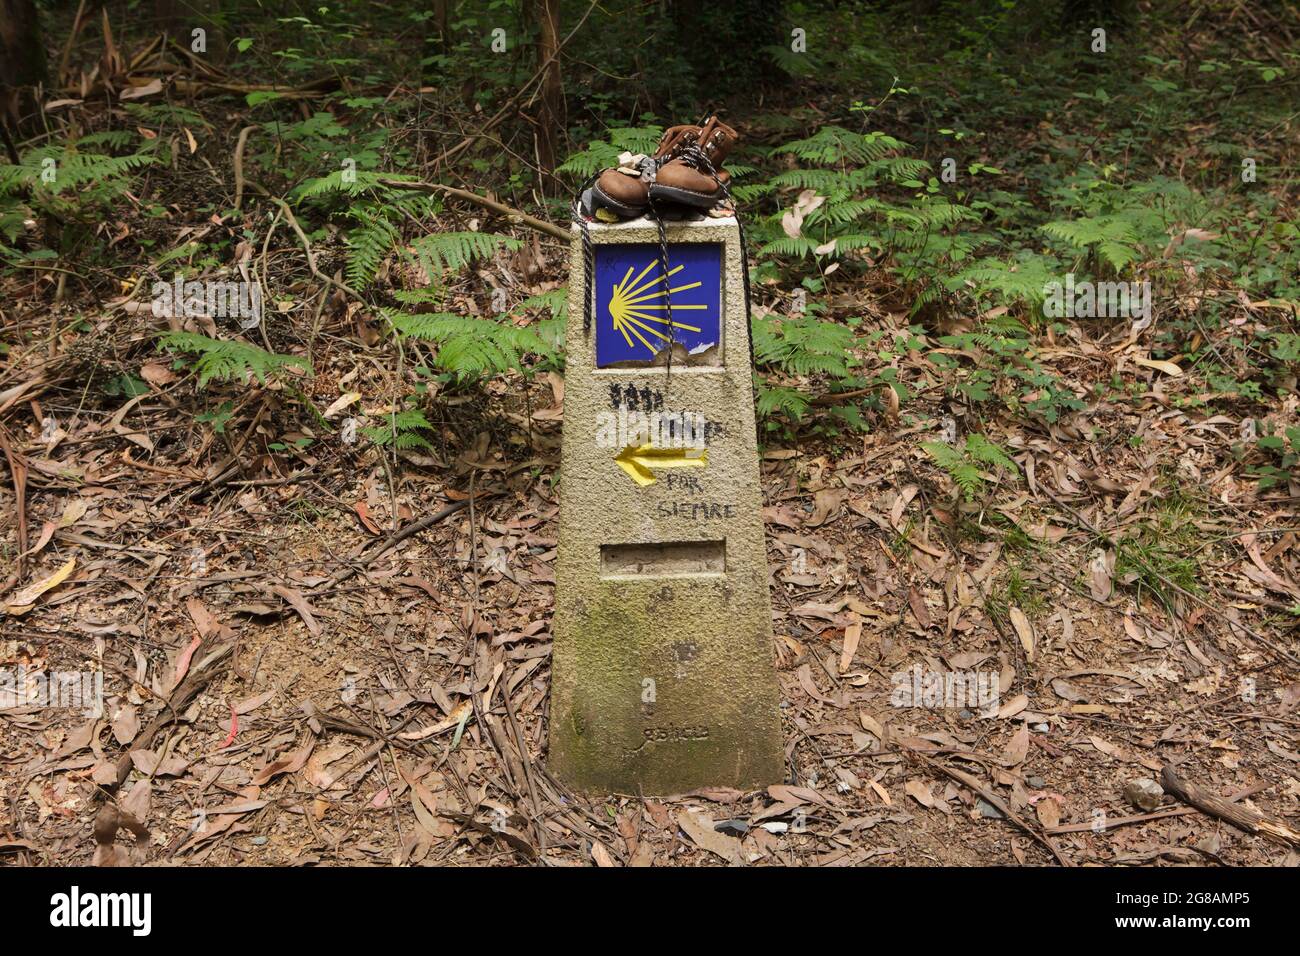 Camino de Santiago (Way of Saint James). Pilgrim boots placed on the traditional kilometre milestone of the Camino de Santiago near the town of Arzúa in Galicia, Spain. The French route and the Northern route of the Camino de Santiago go through this town shortly before both routs reach Santiago de Compostela. The scallop shell, also known as the Shell of Saint James is depicted in the milestone as a traditional symbol of the pilgrimage to Santiago de Compostela. Stock Photo